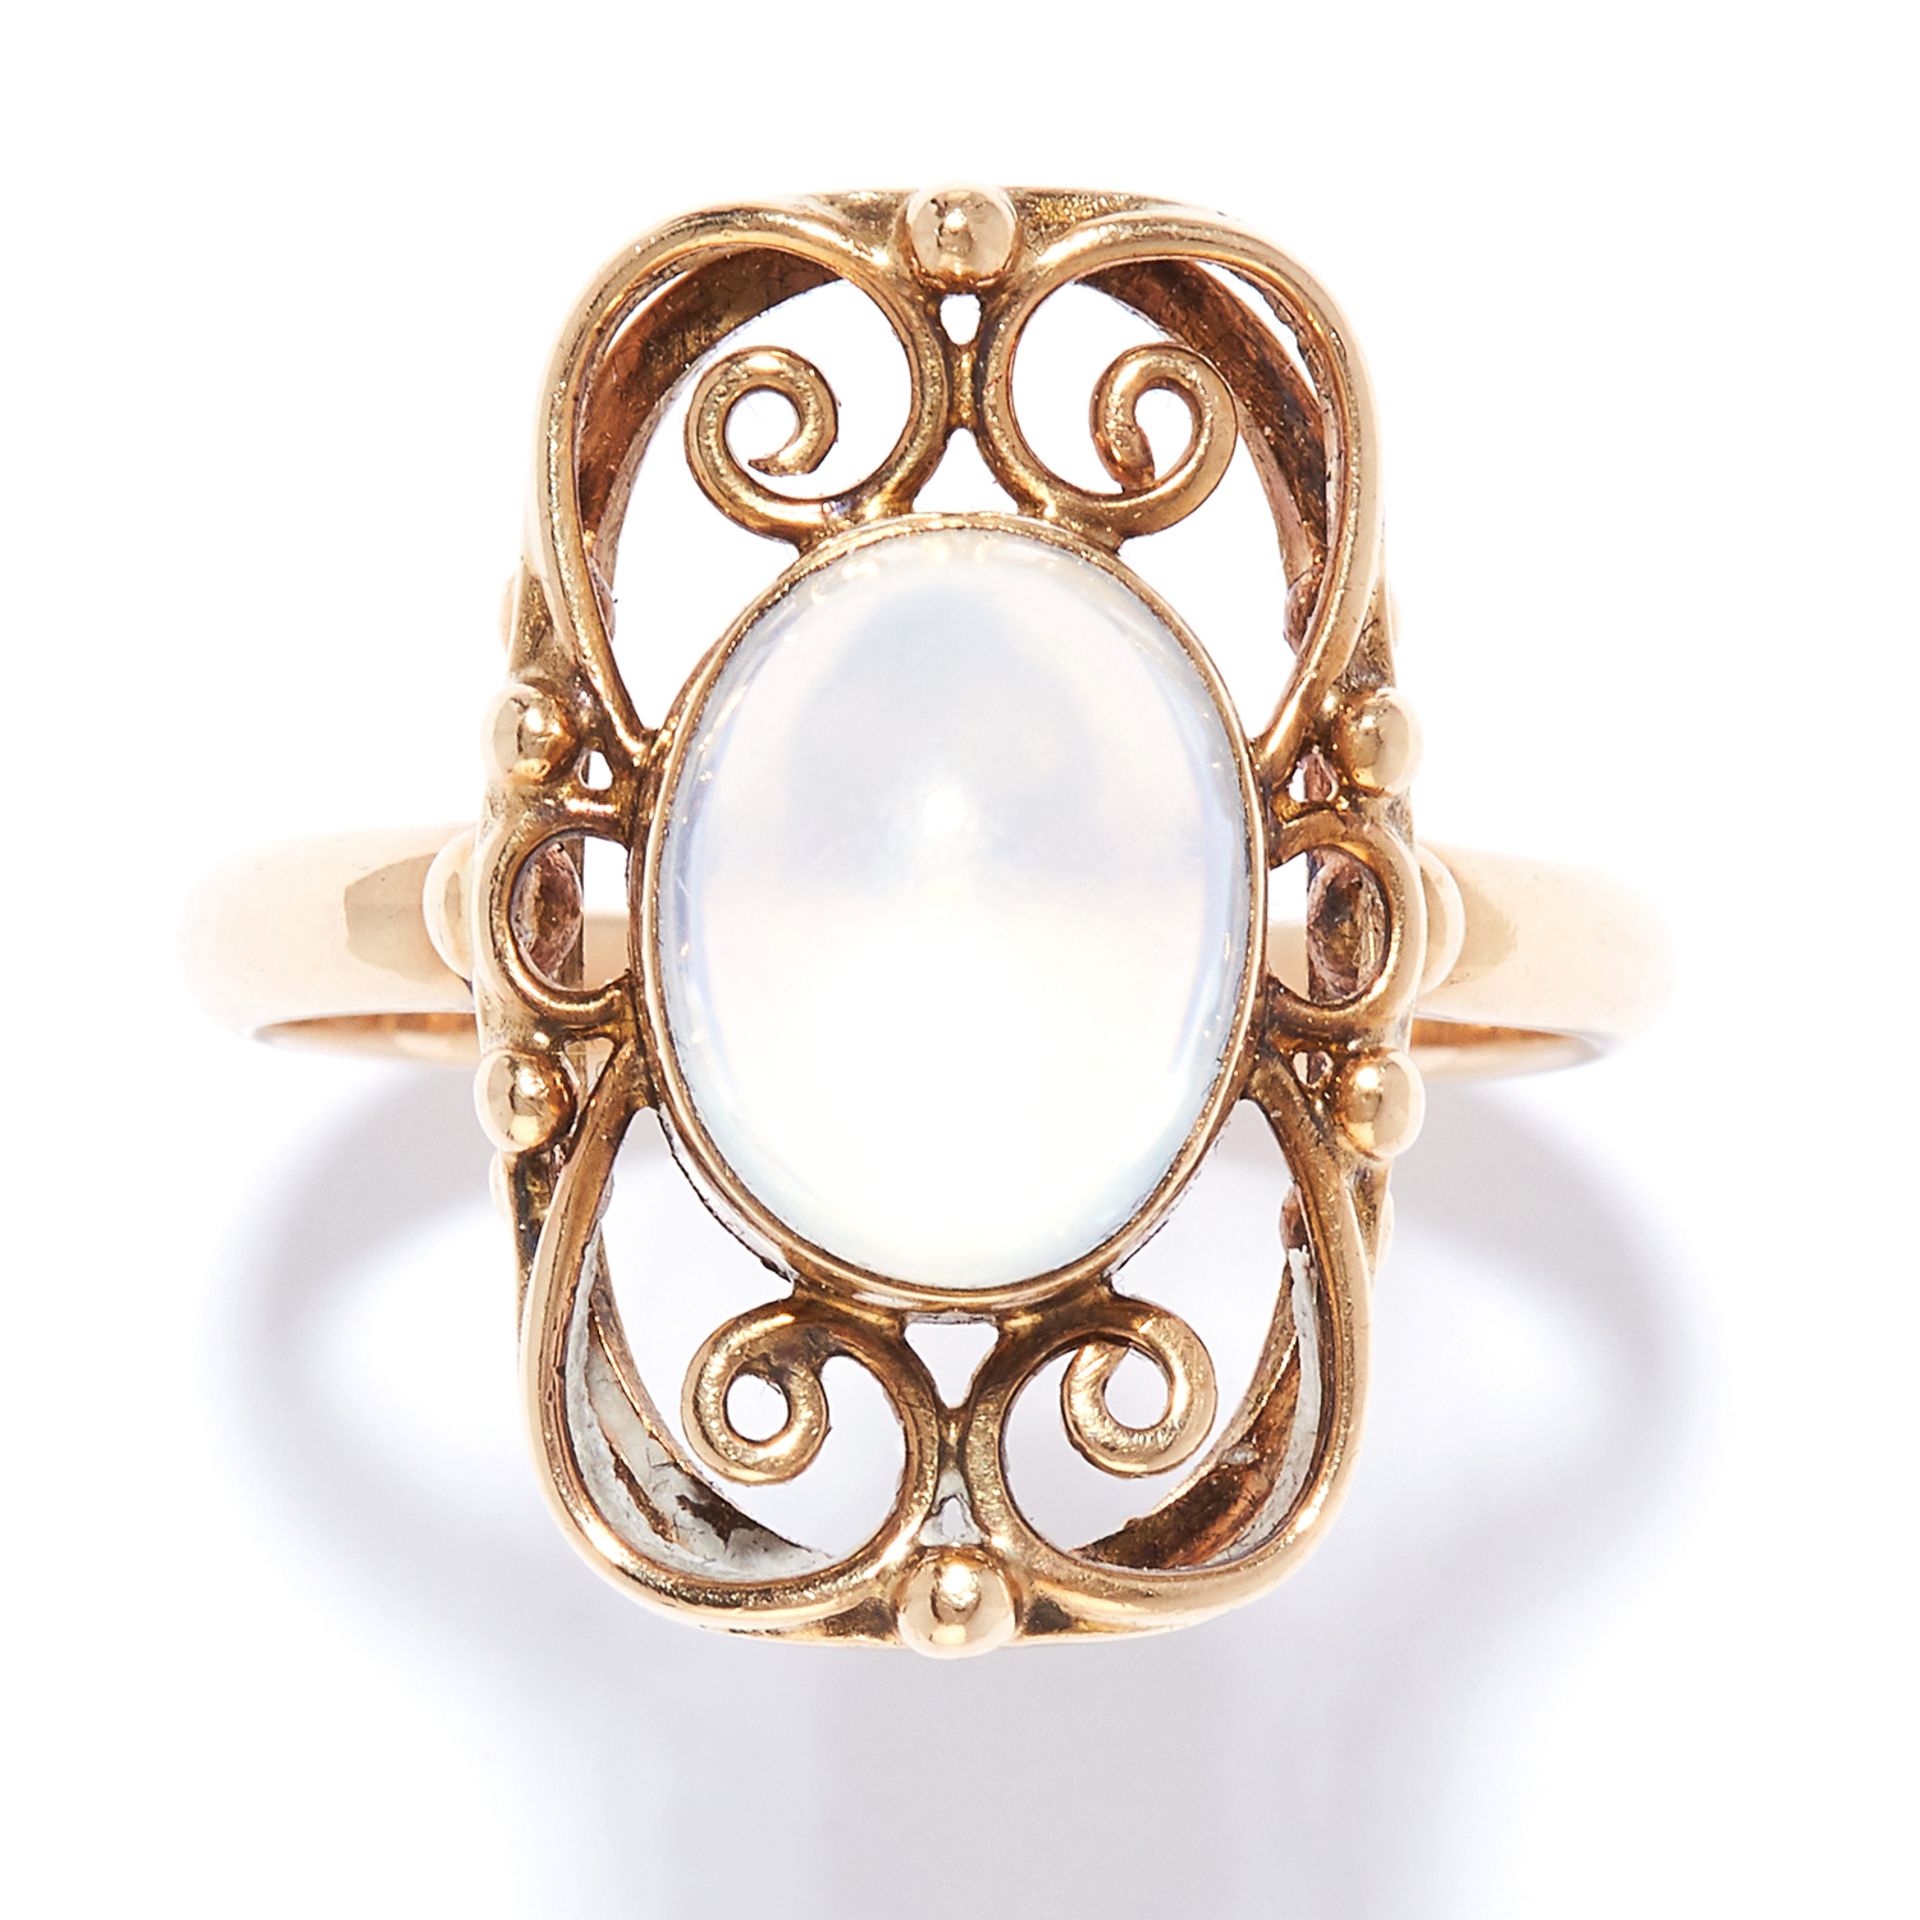 ANTIQUE MOONSTONE DRESS RING in yellow gold, set with a cabochon moonstone in open framework design,